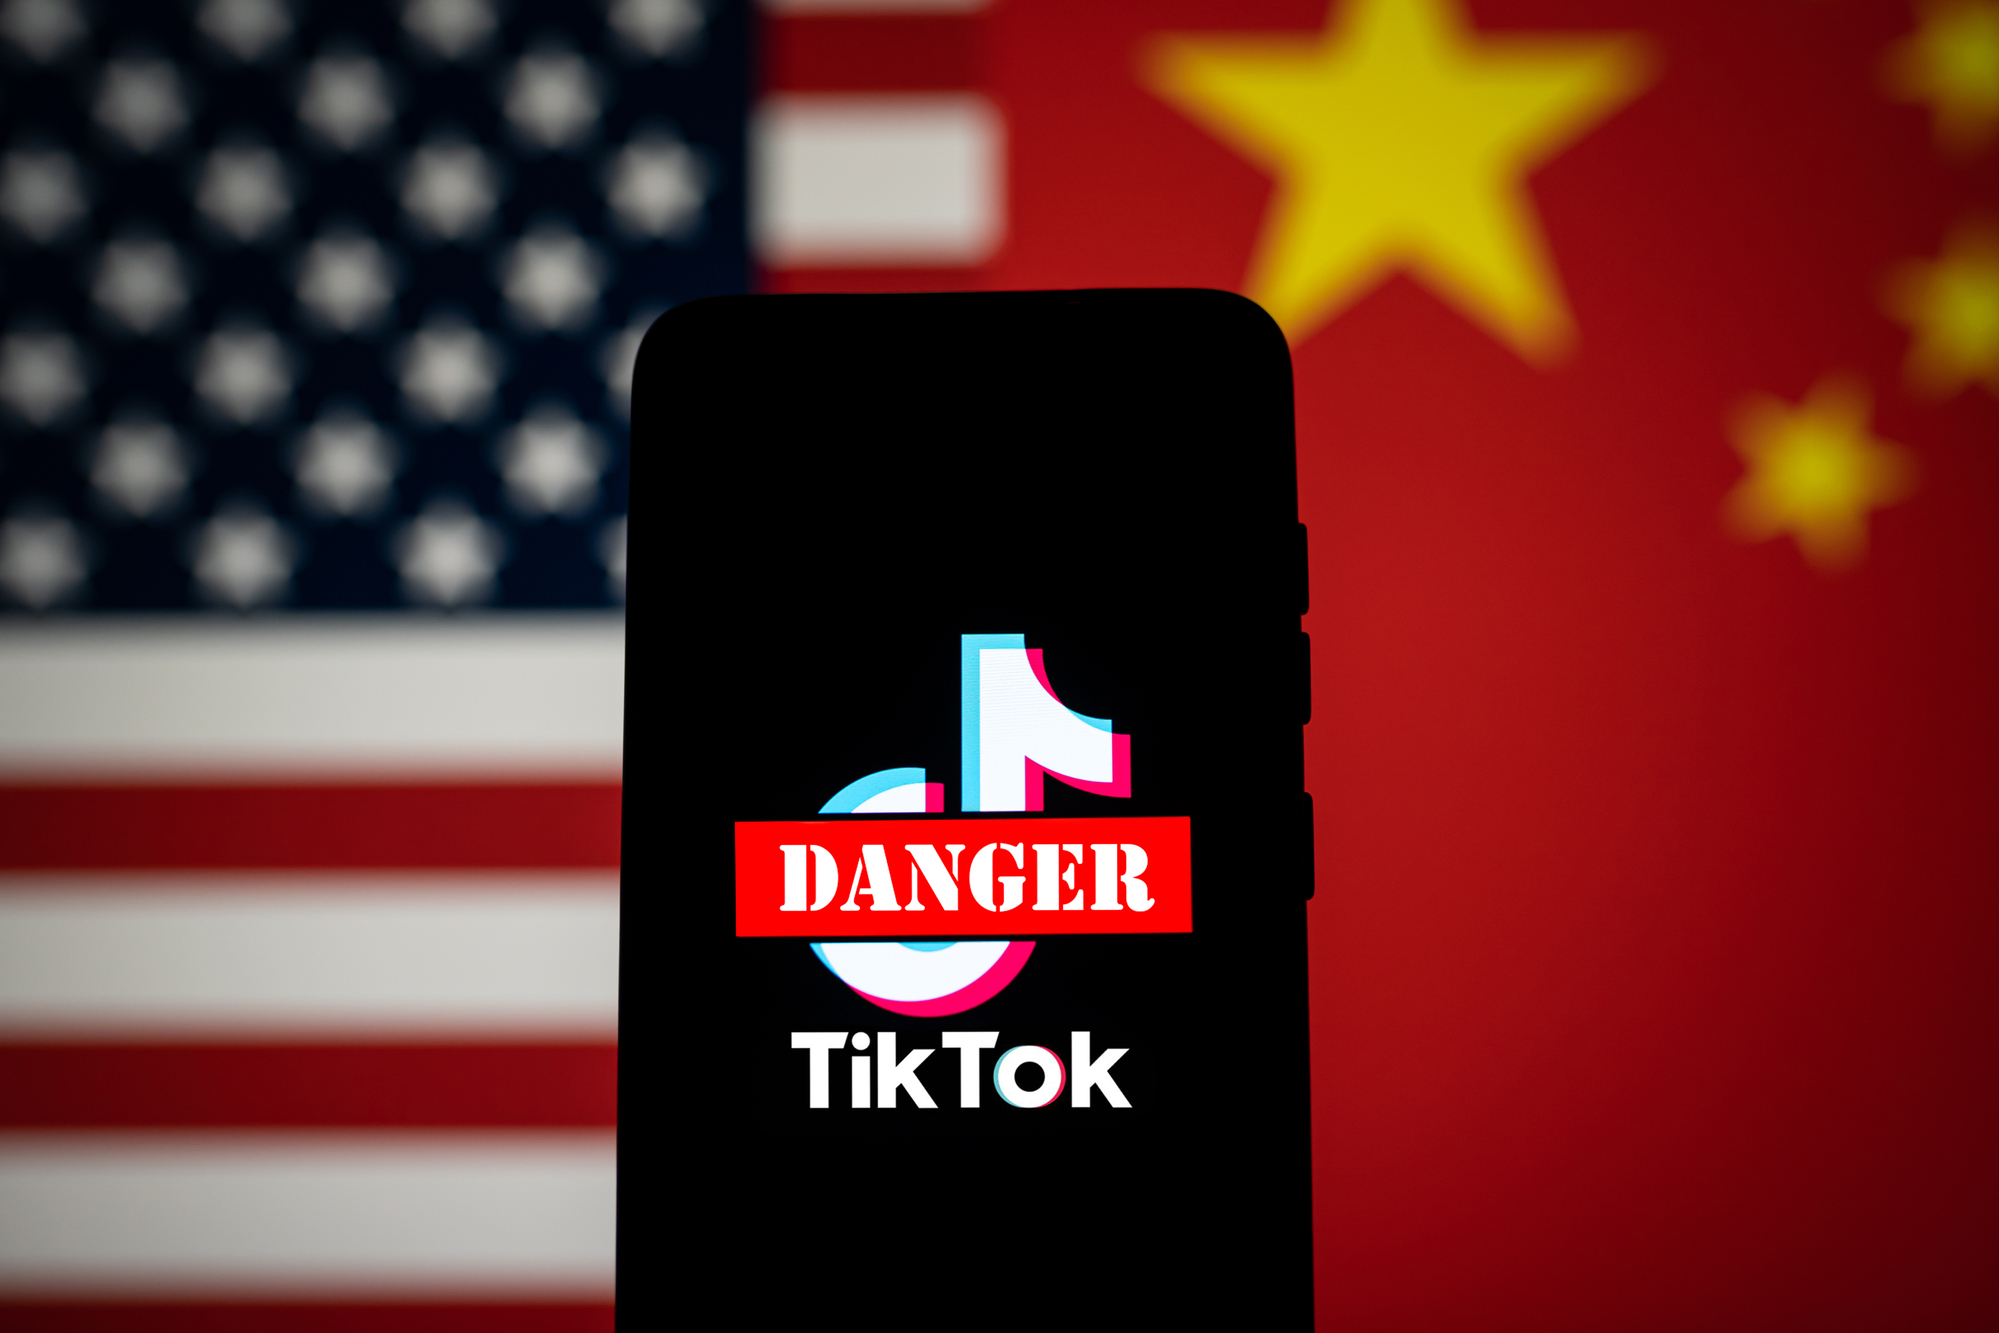 brendan-carr:-tiktok-is-a-“clear-and-present-danger-to-america”